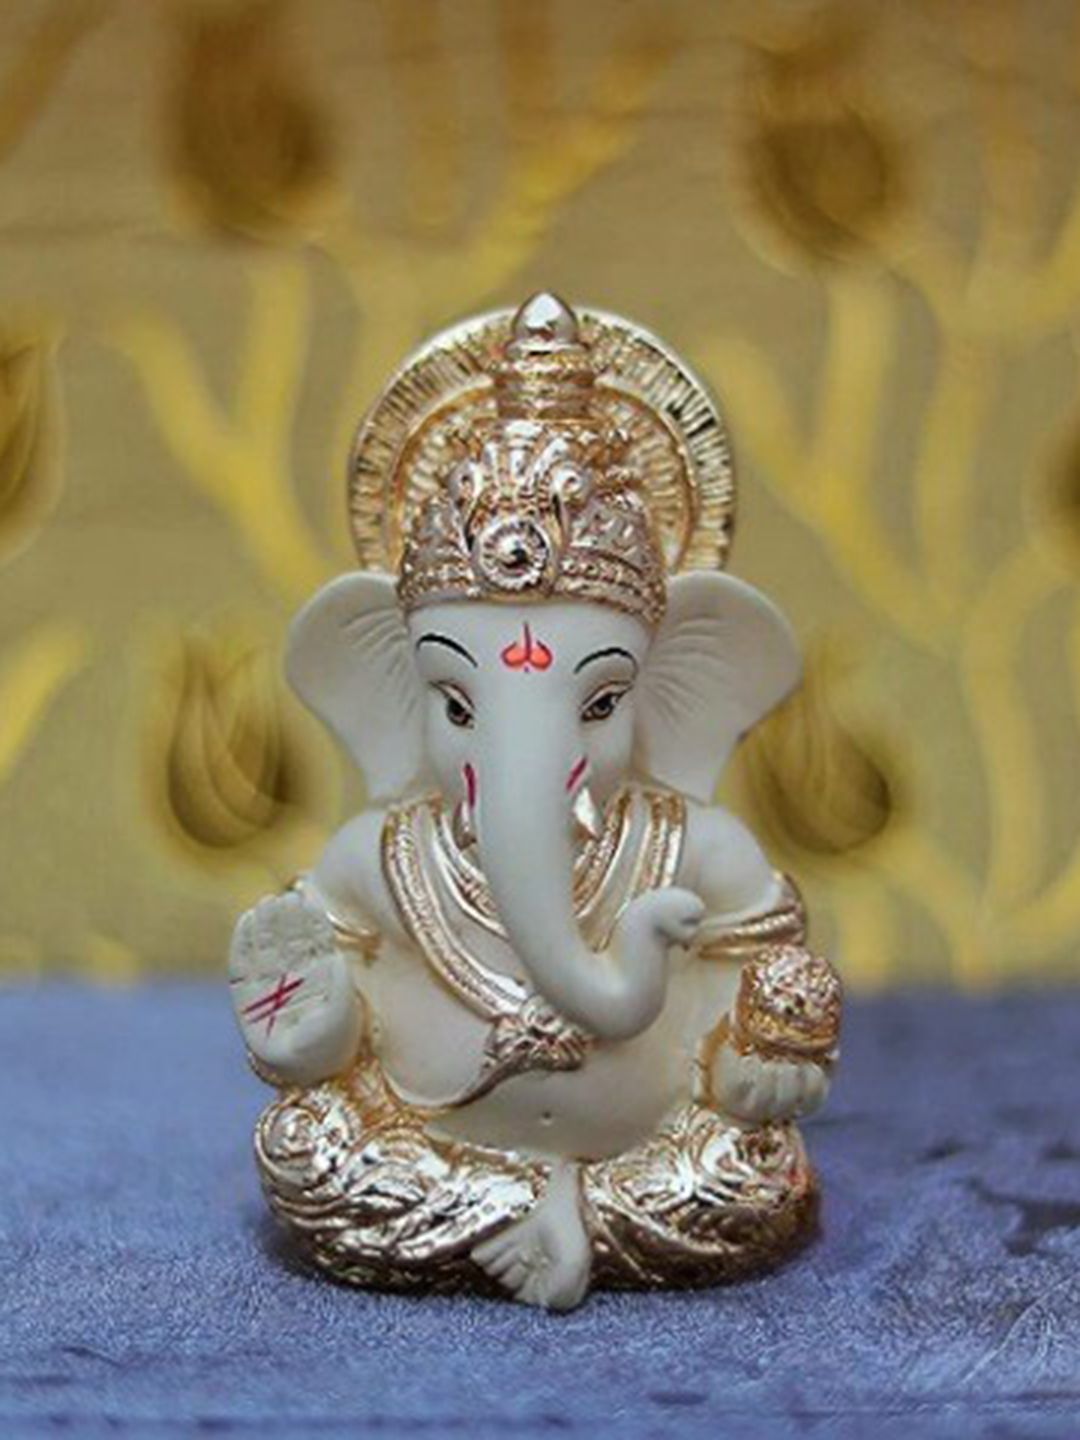 Perpetual Cream-Colored & Gold-Toned Ganesha Idol Showpiece Price in India